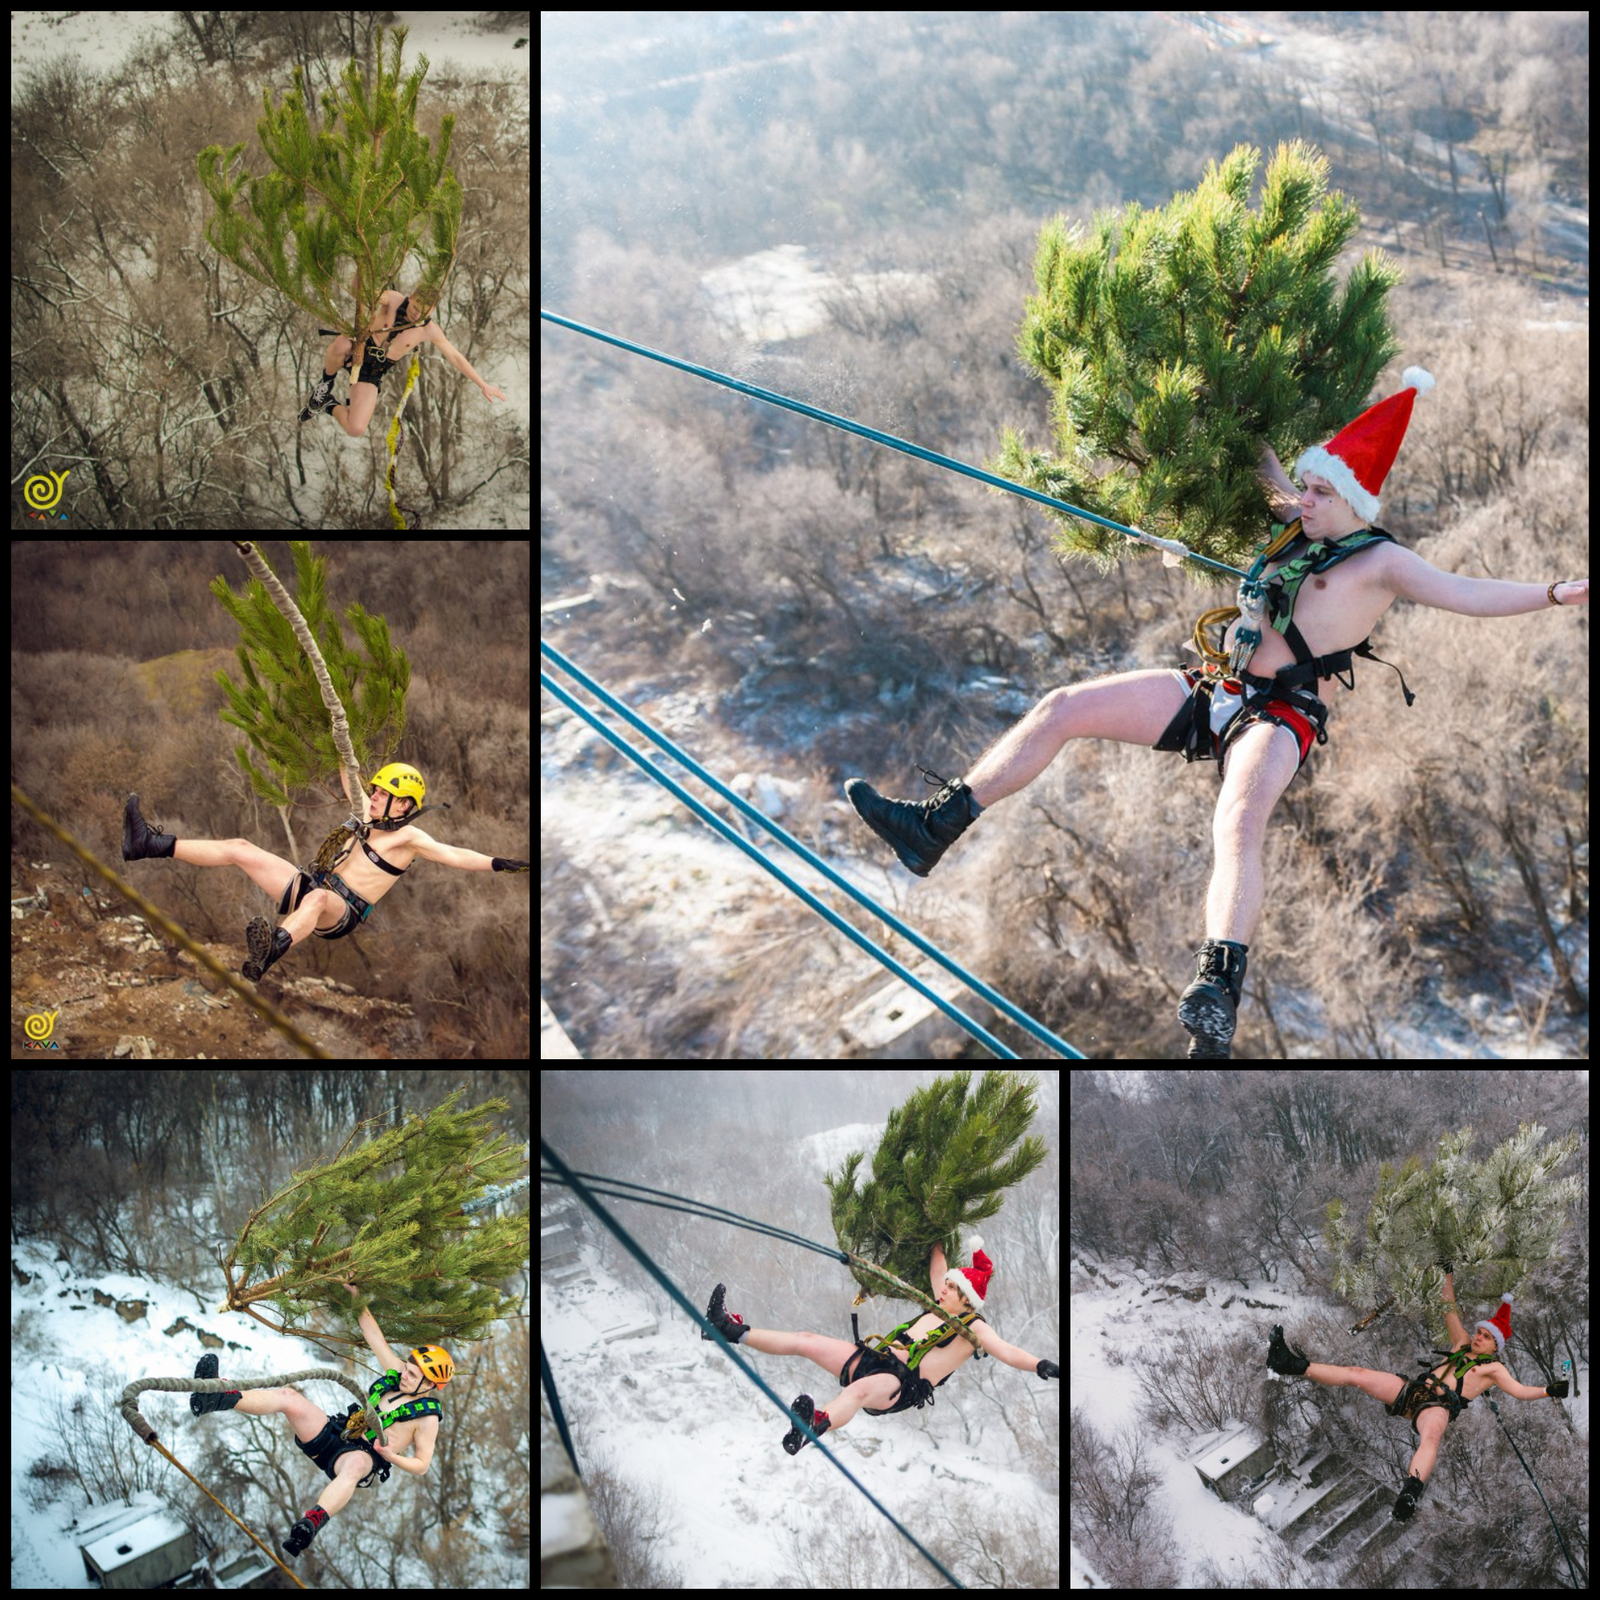 6th Annual Traditional Tree Jump 2018 - My, Why, Christmas trees, Extreme, Rope jumping, Fun, Traditions, 2018, New Year, Video